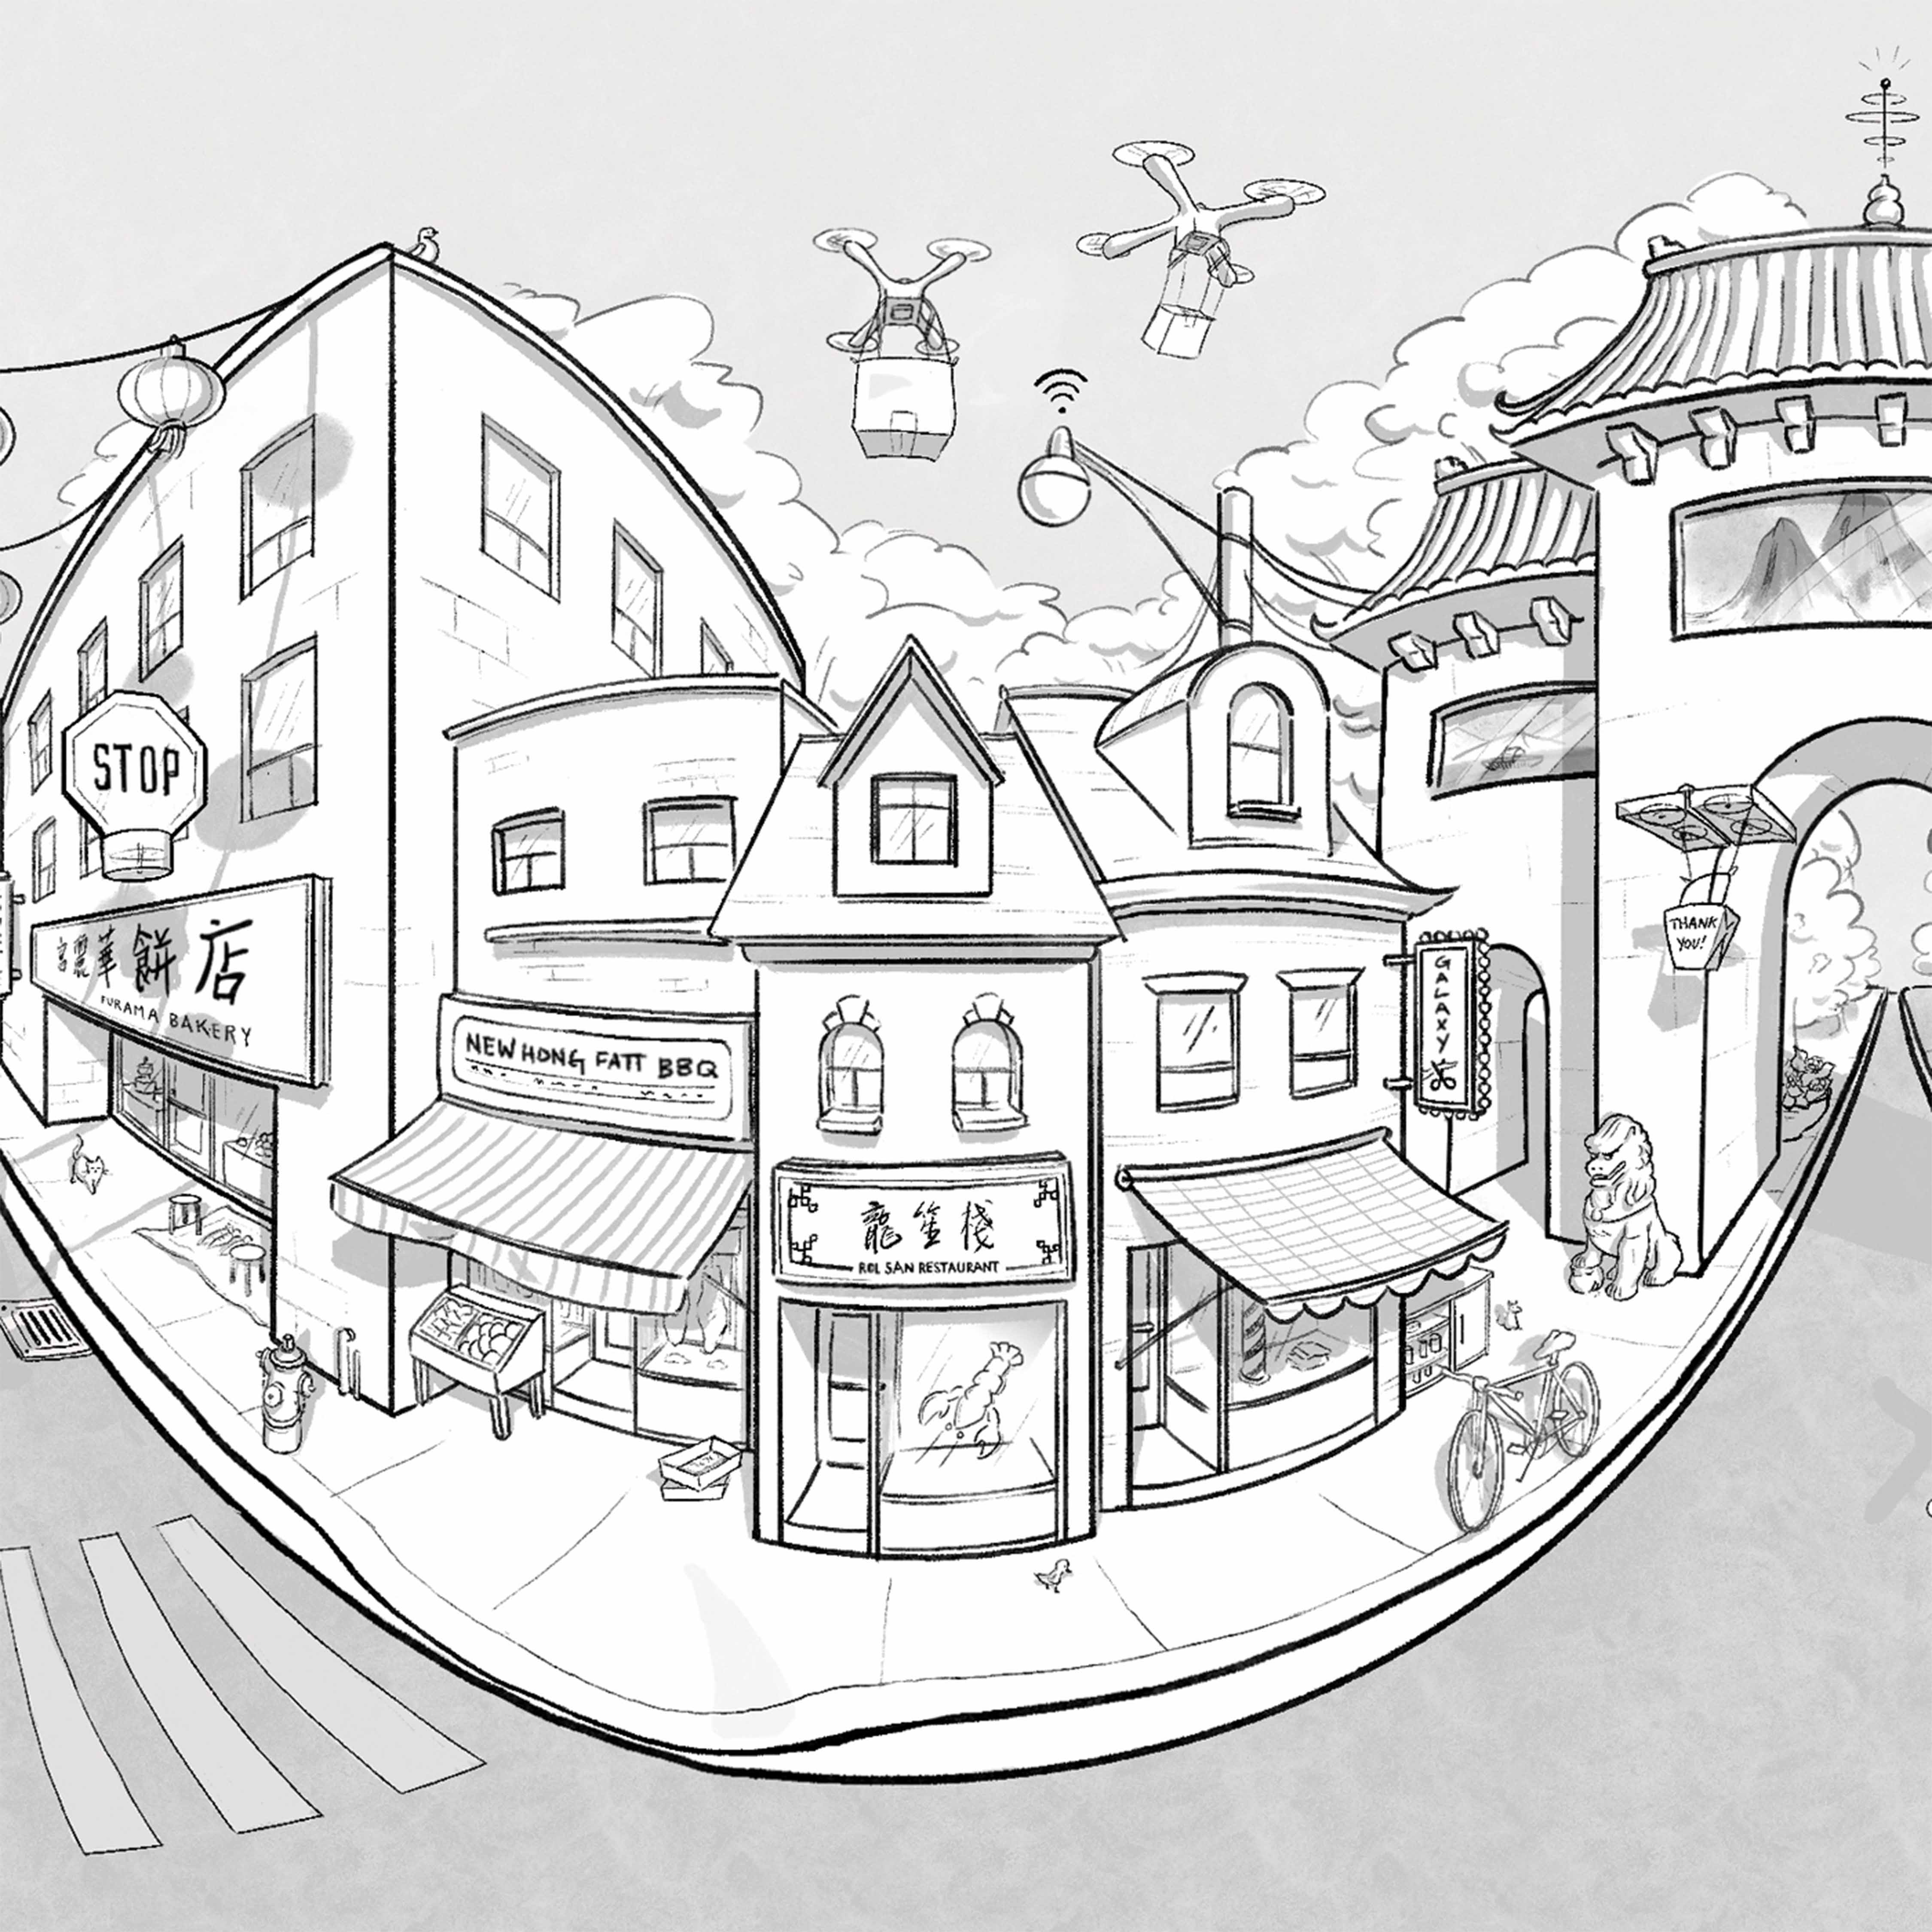 A cartoon-styled streetscape, distorted to resemble a fisheye lens. There appear to be structures flying in the sky.